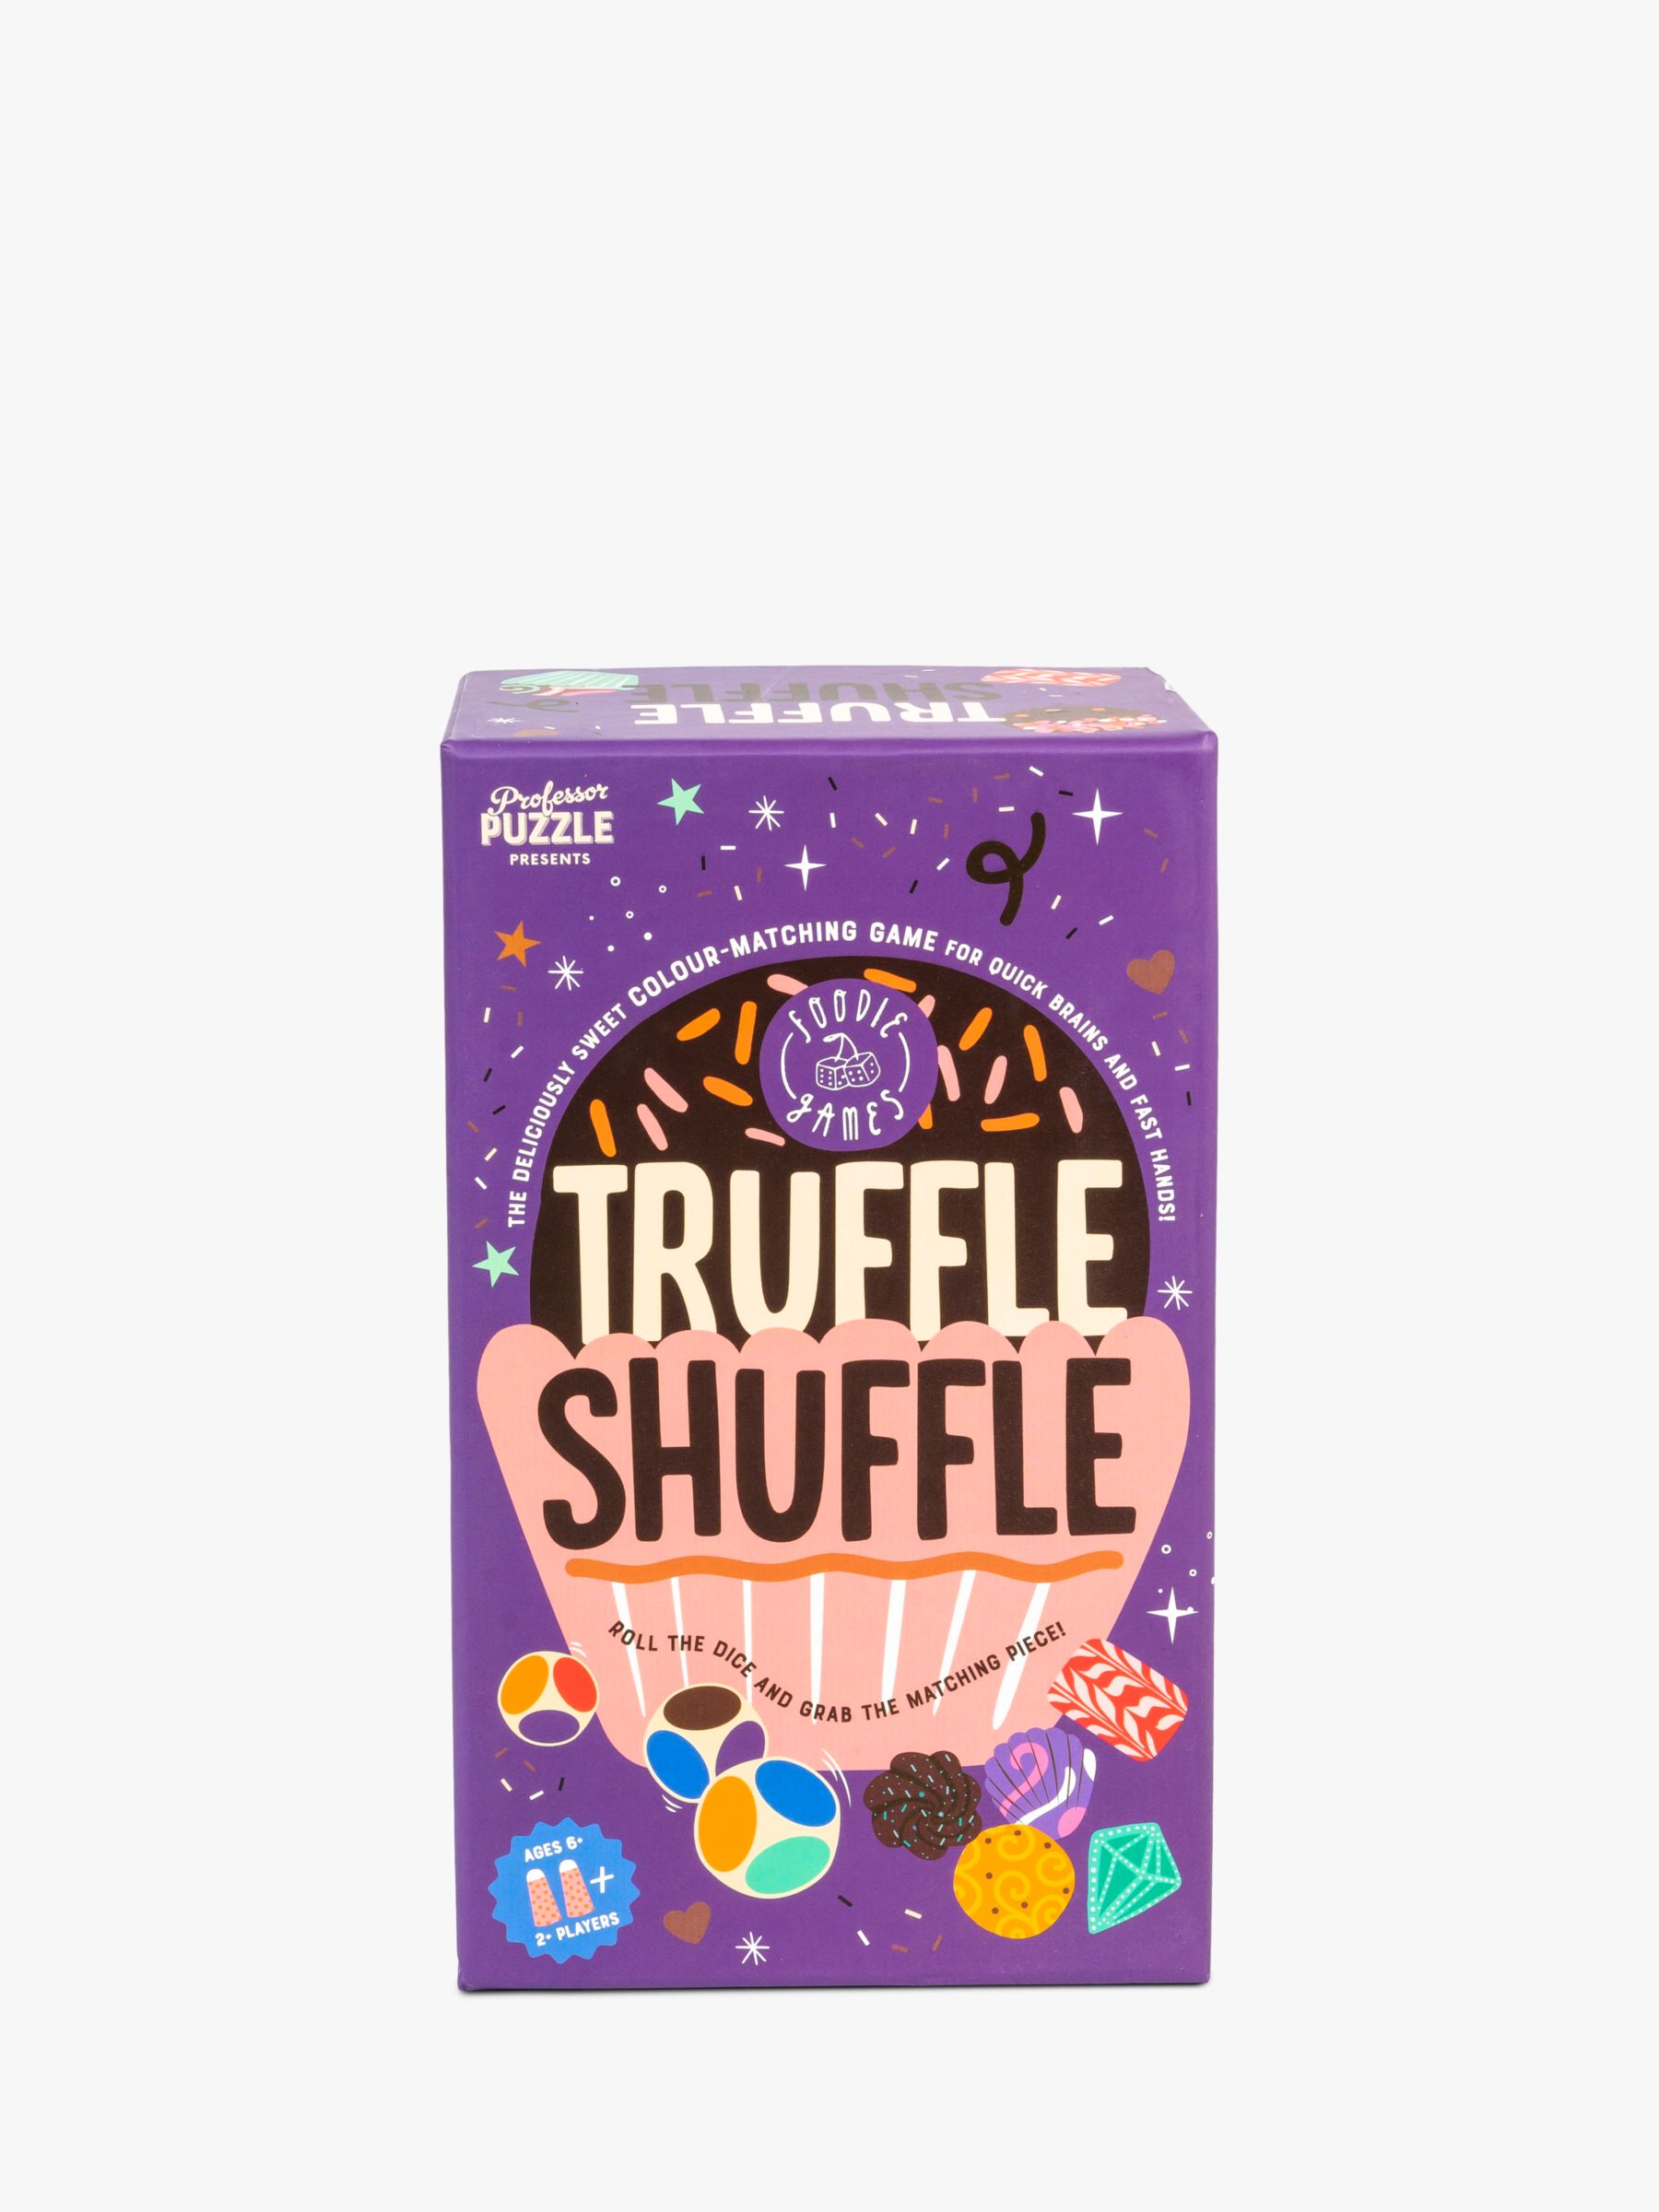 Professor Puzzle Truffle Shuffle Party Game